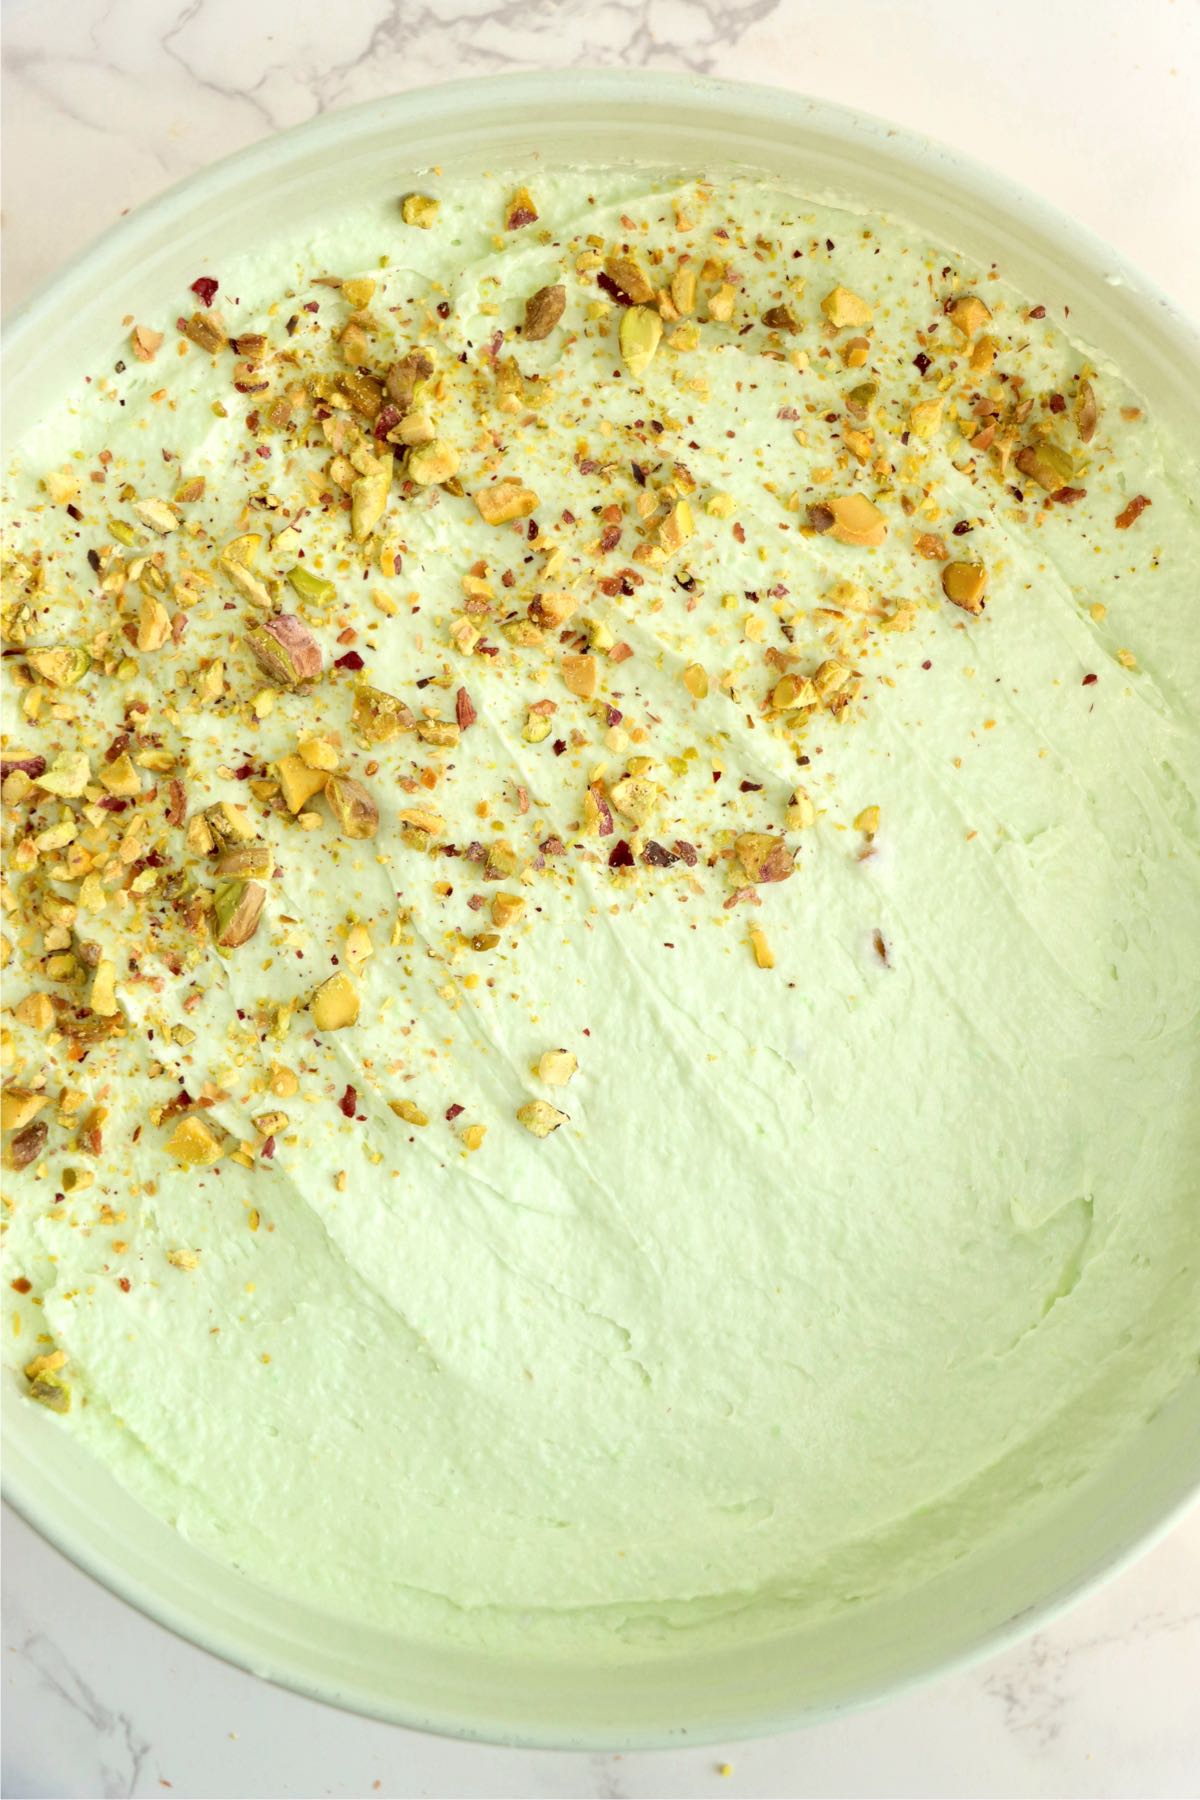 Green cheesecake with a sprinkling of crushed pistachio nuts